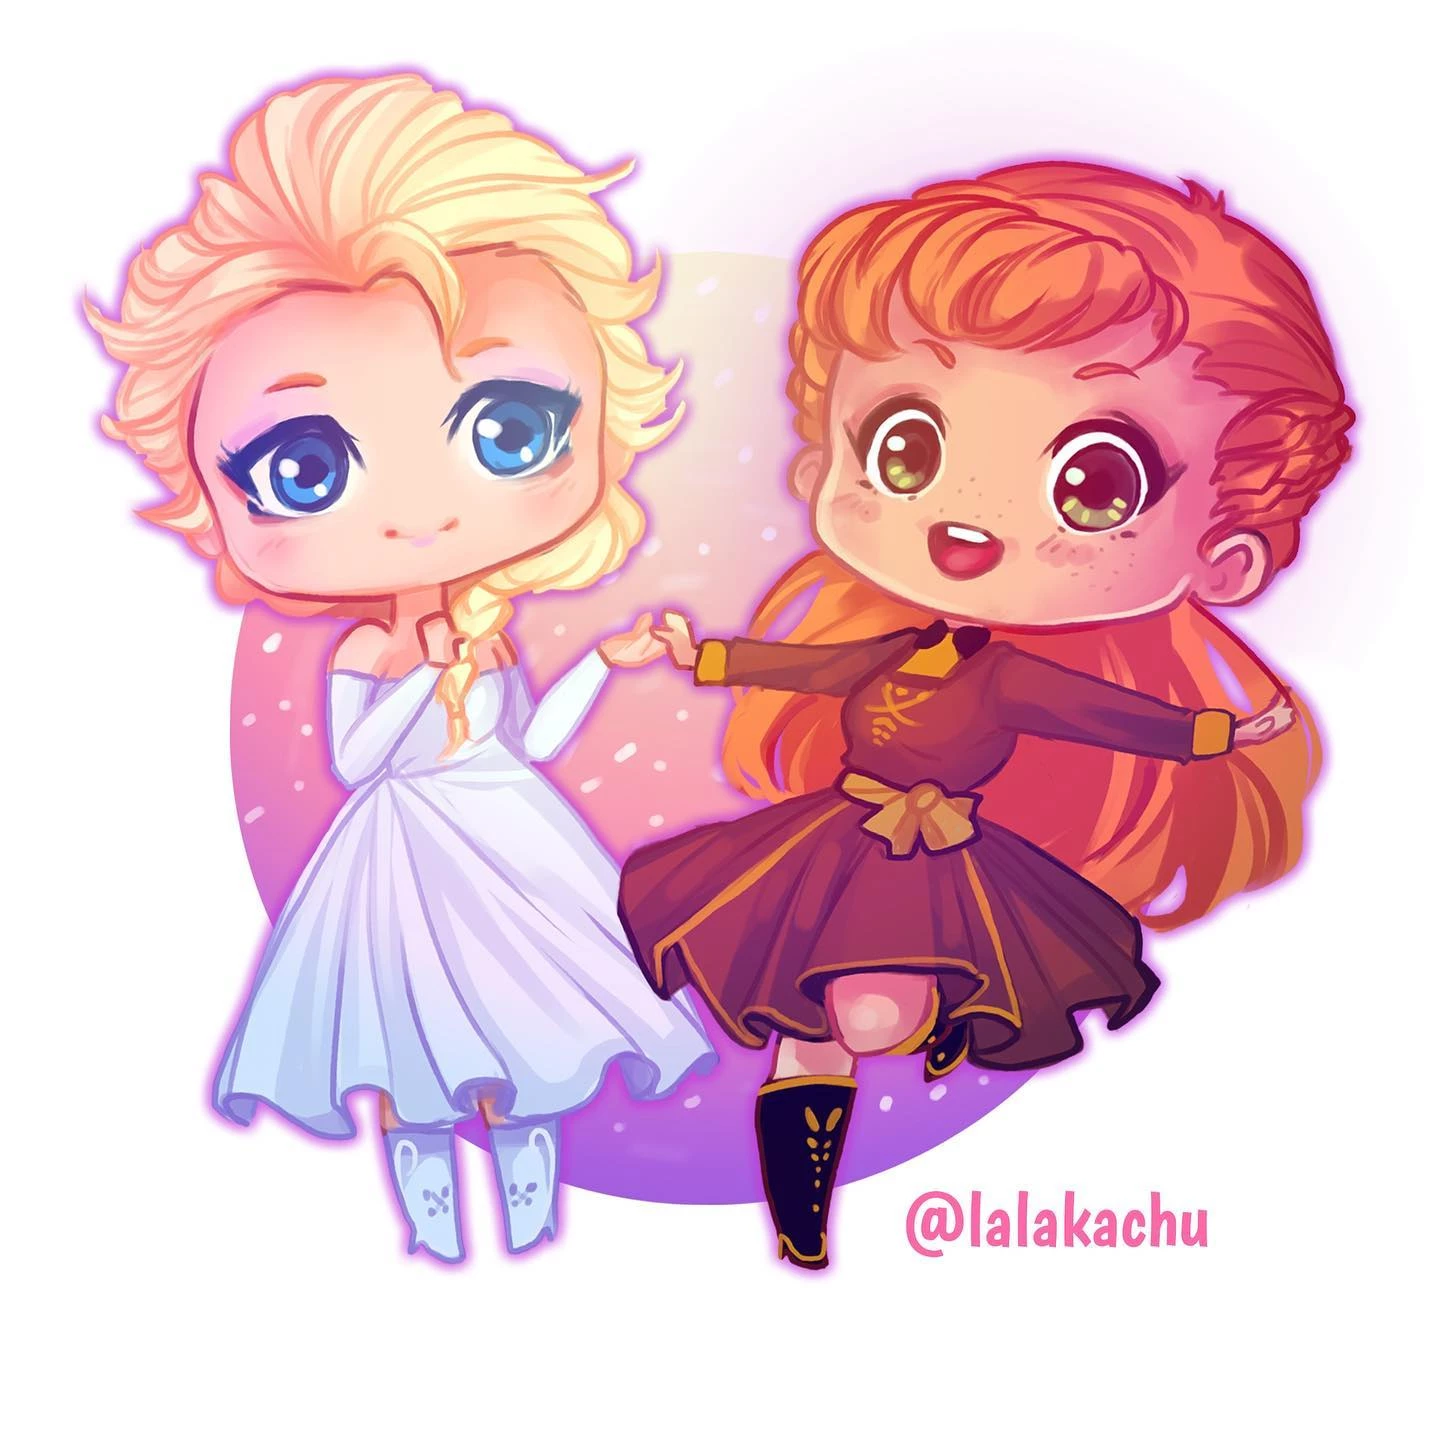 The Dynamic Duo, Elsa And Anna, Is Ready For Another Adventure Into The Unknown